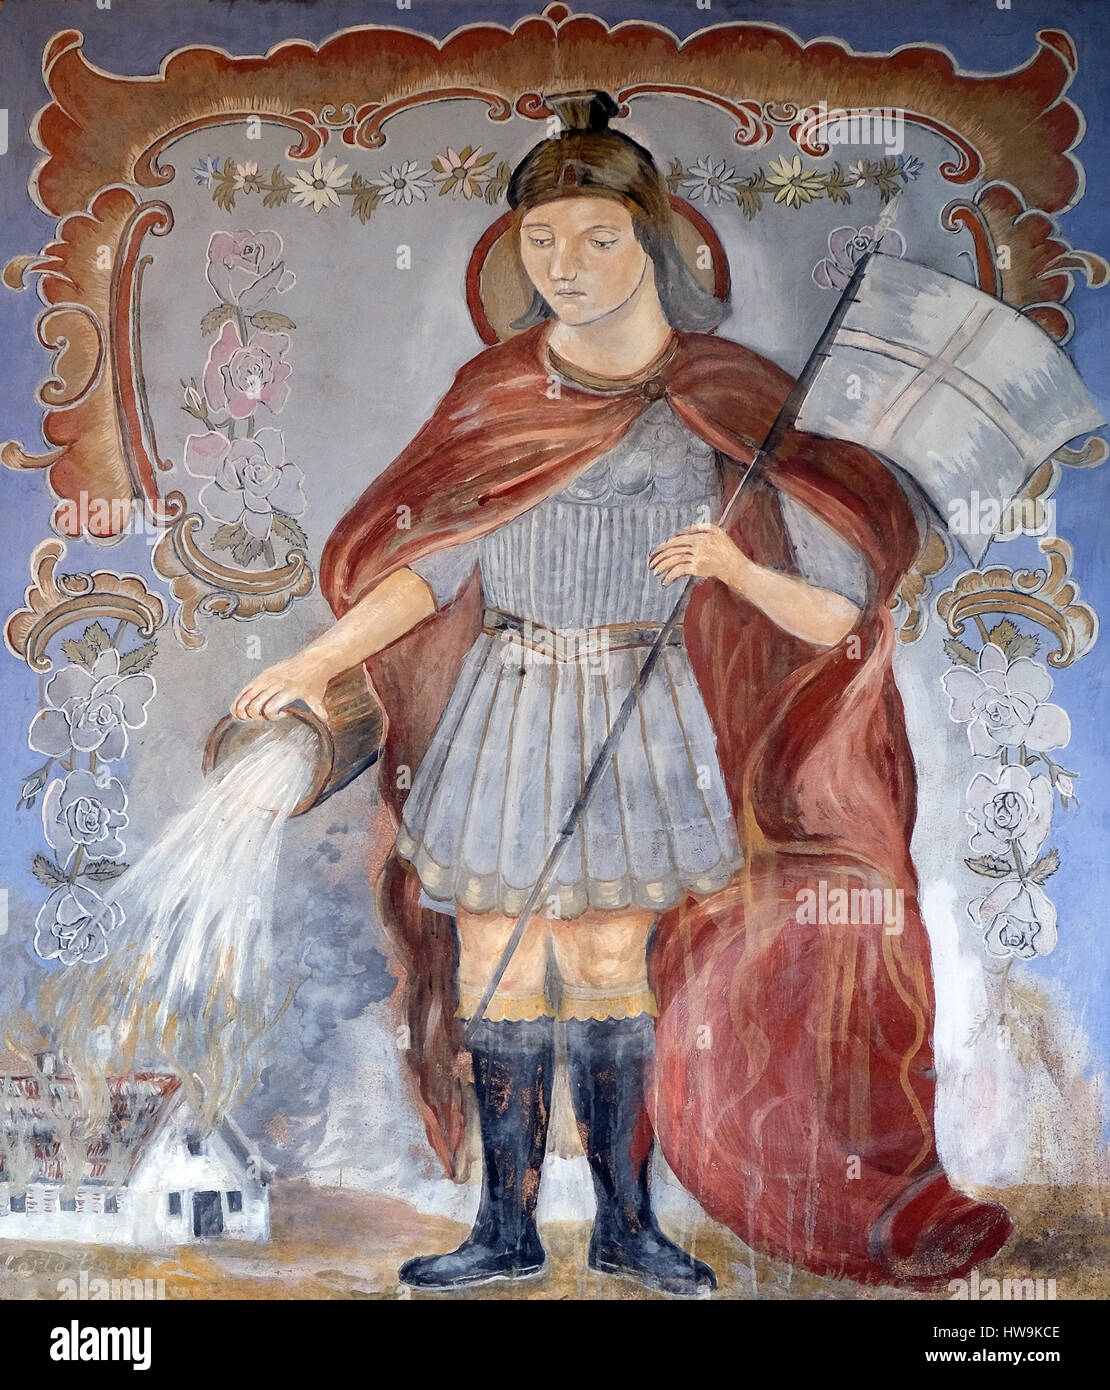 Saint Florian painting on the facade of the house in Bad Ischl, Austria on December 14, 2014. Stock Photo